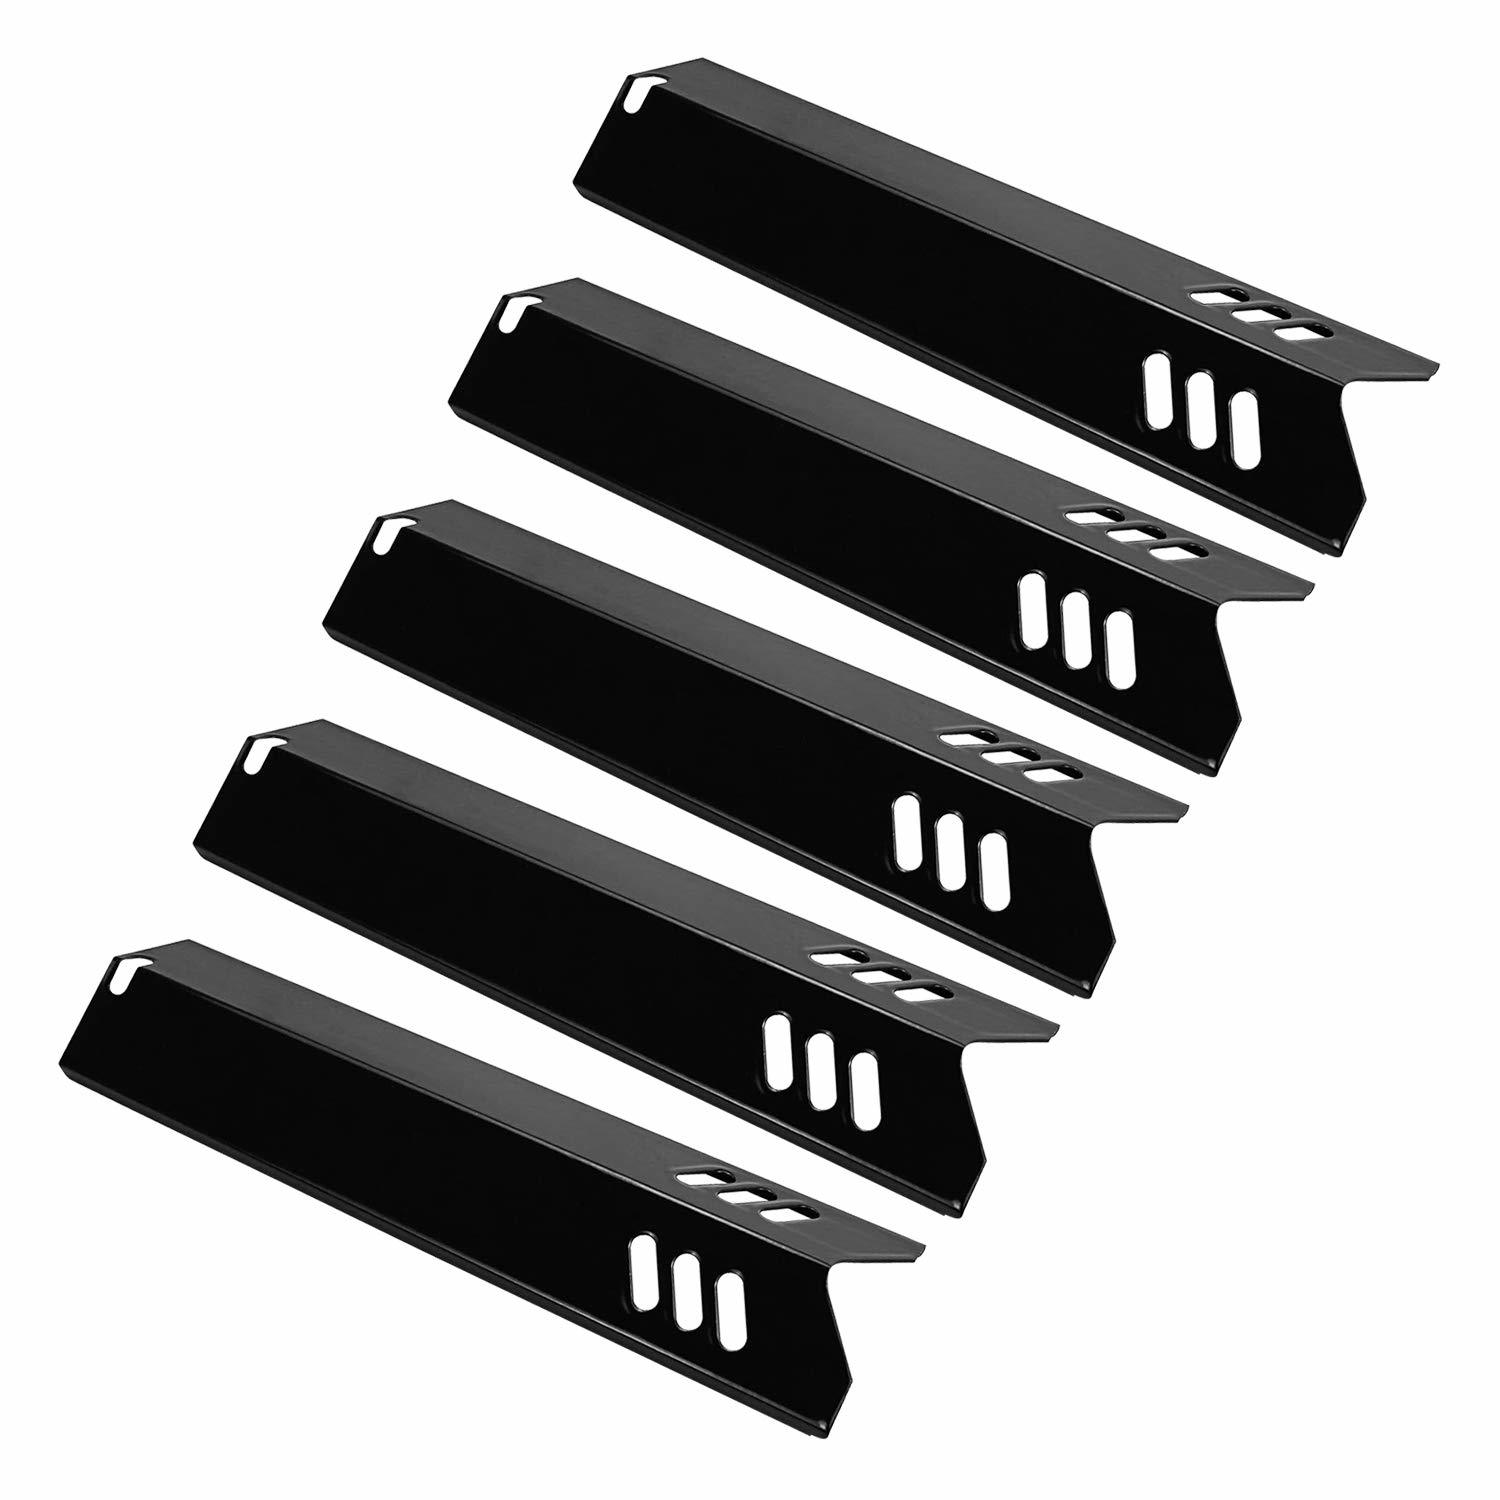 Primary image for 15 Inch Grill Heat Plates 5 Pack, Grill Replacement Parts Porcelain Heat Shields